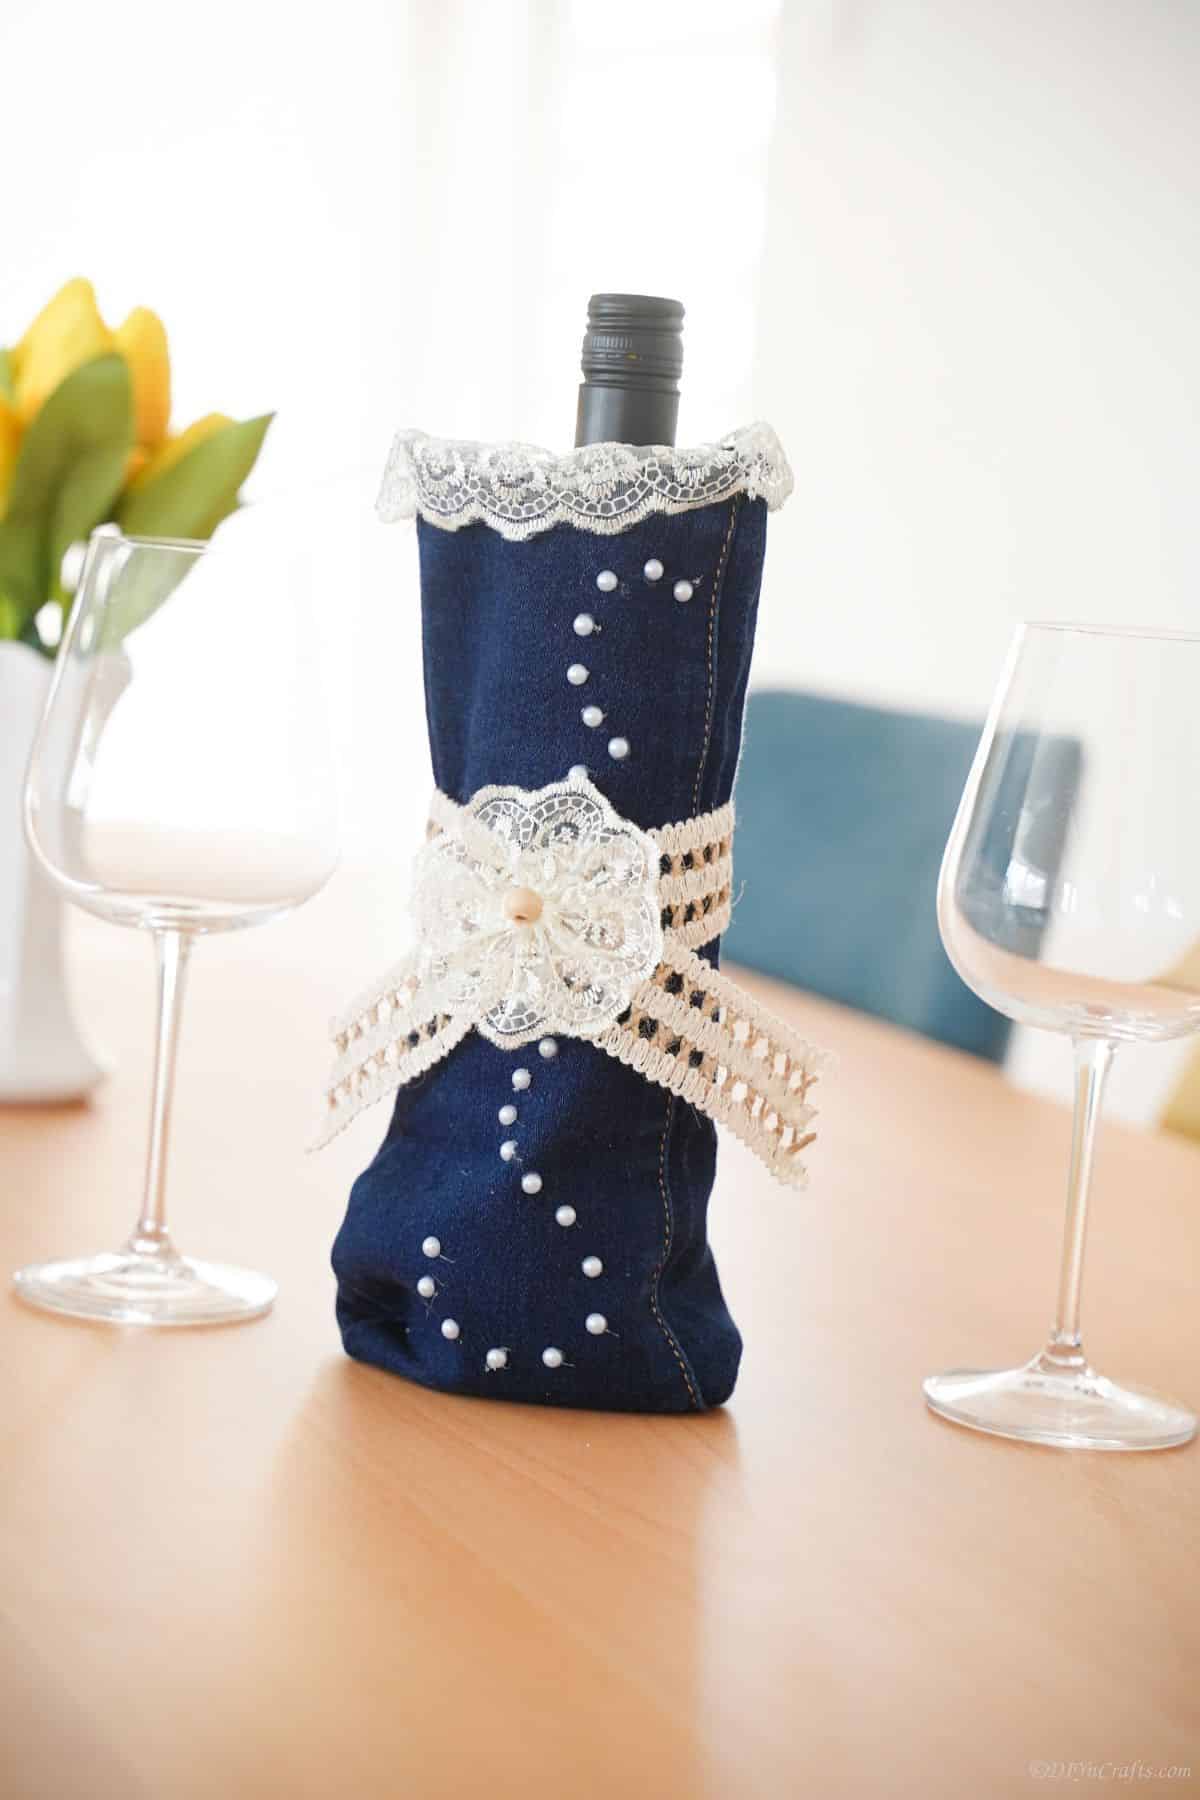 wine bottle cover with lace around middle and beads on sides